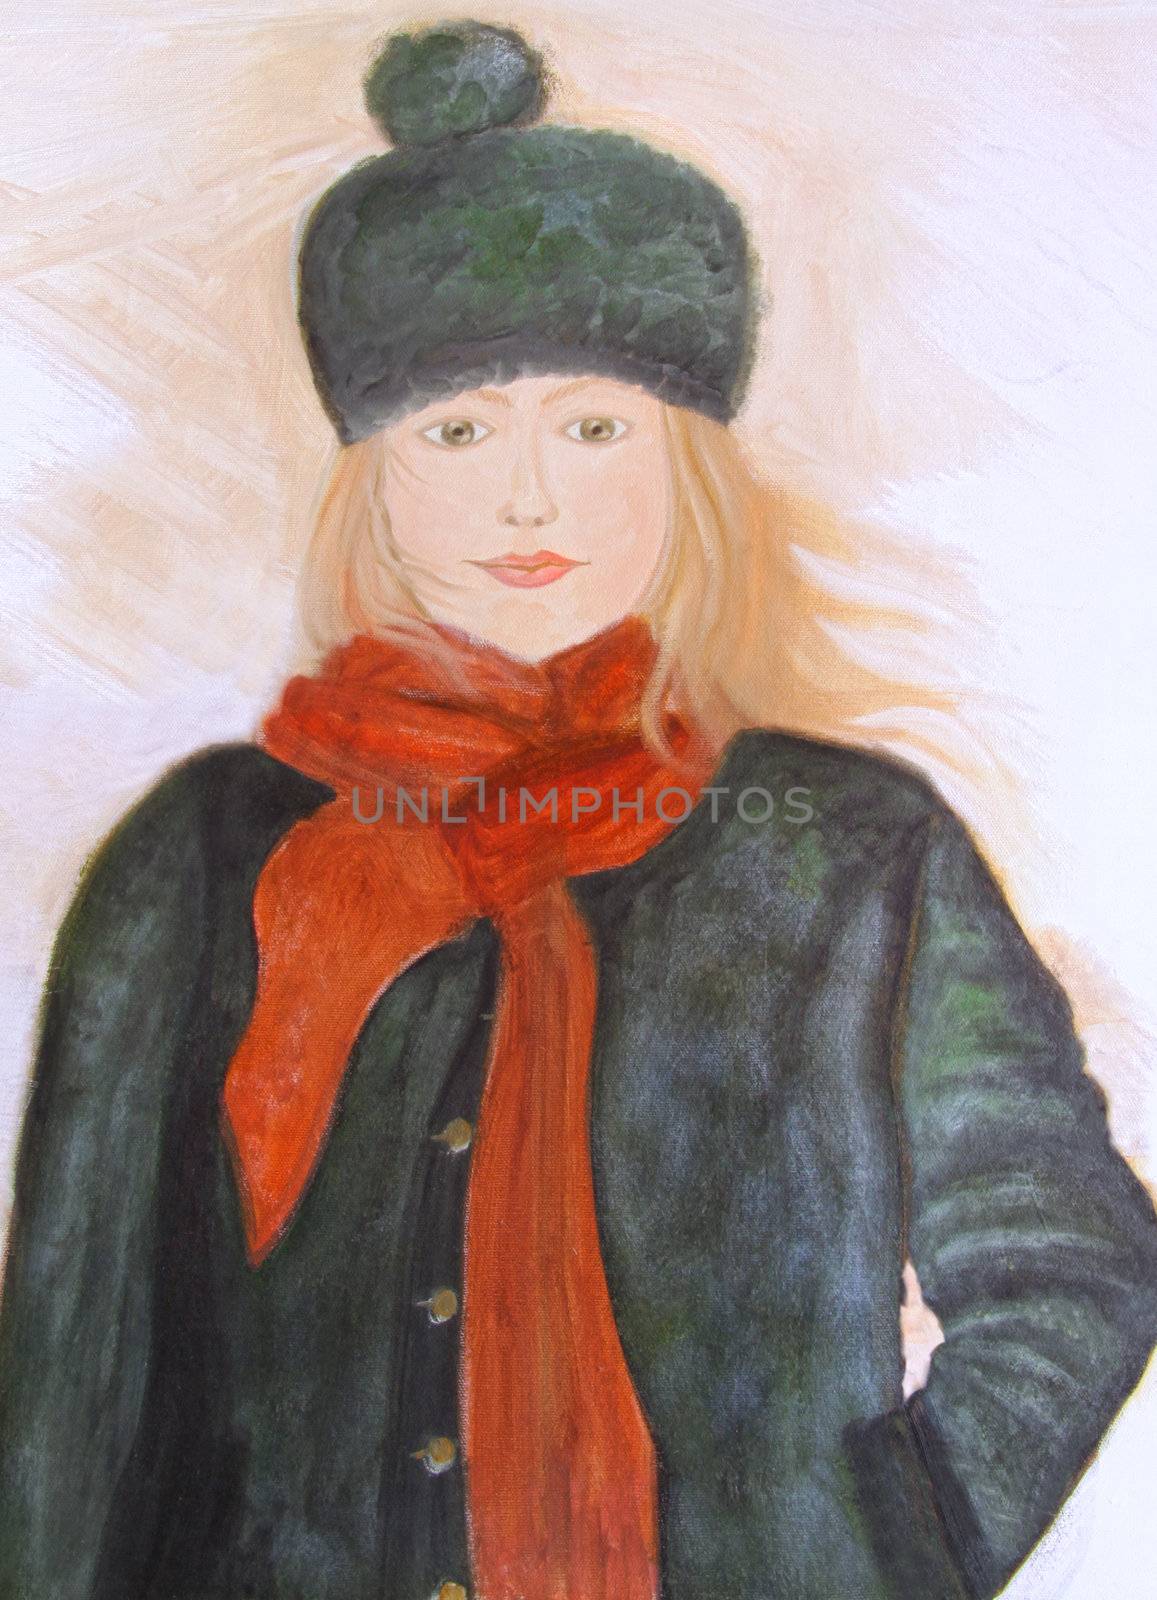 Oil painting of young girl on canvas by Sandralise